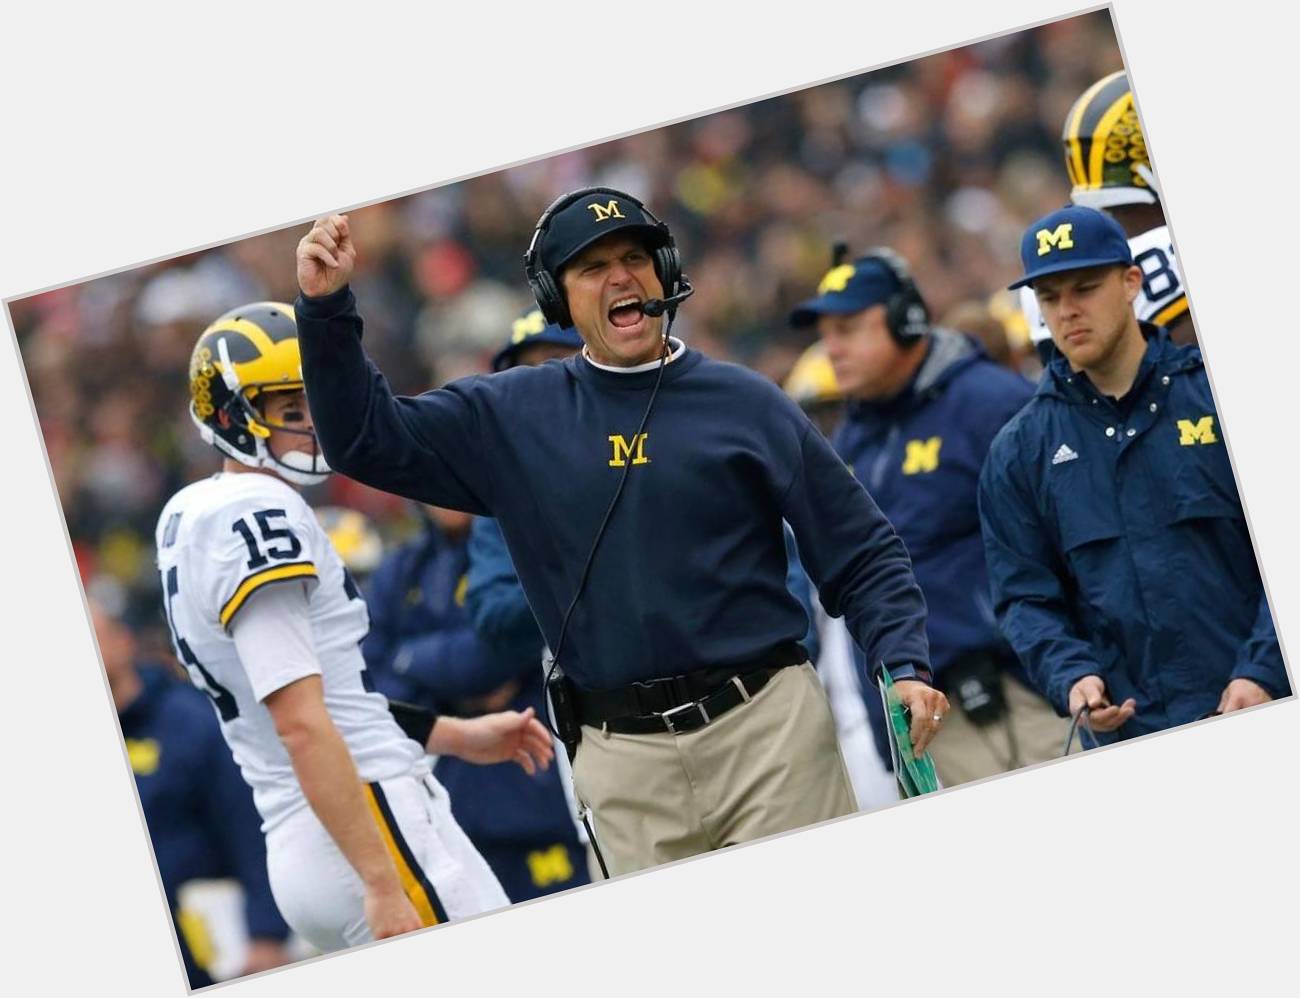 Happy Birthday to Jim Harbaugh who turns 54 today! 